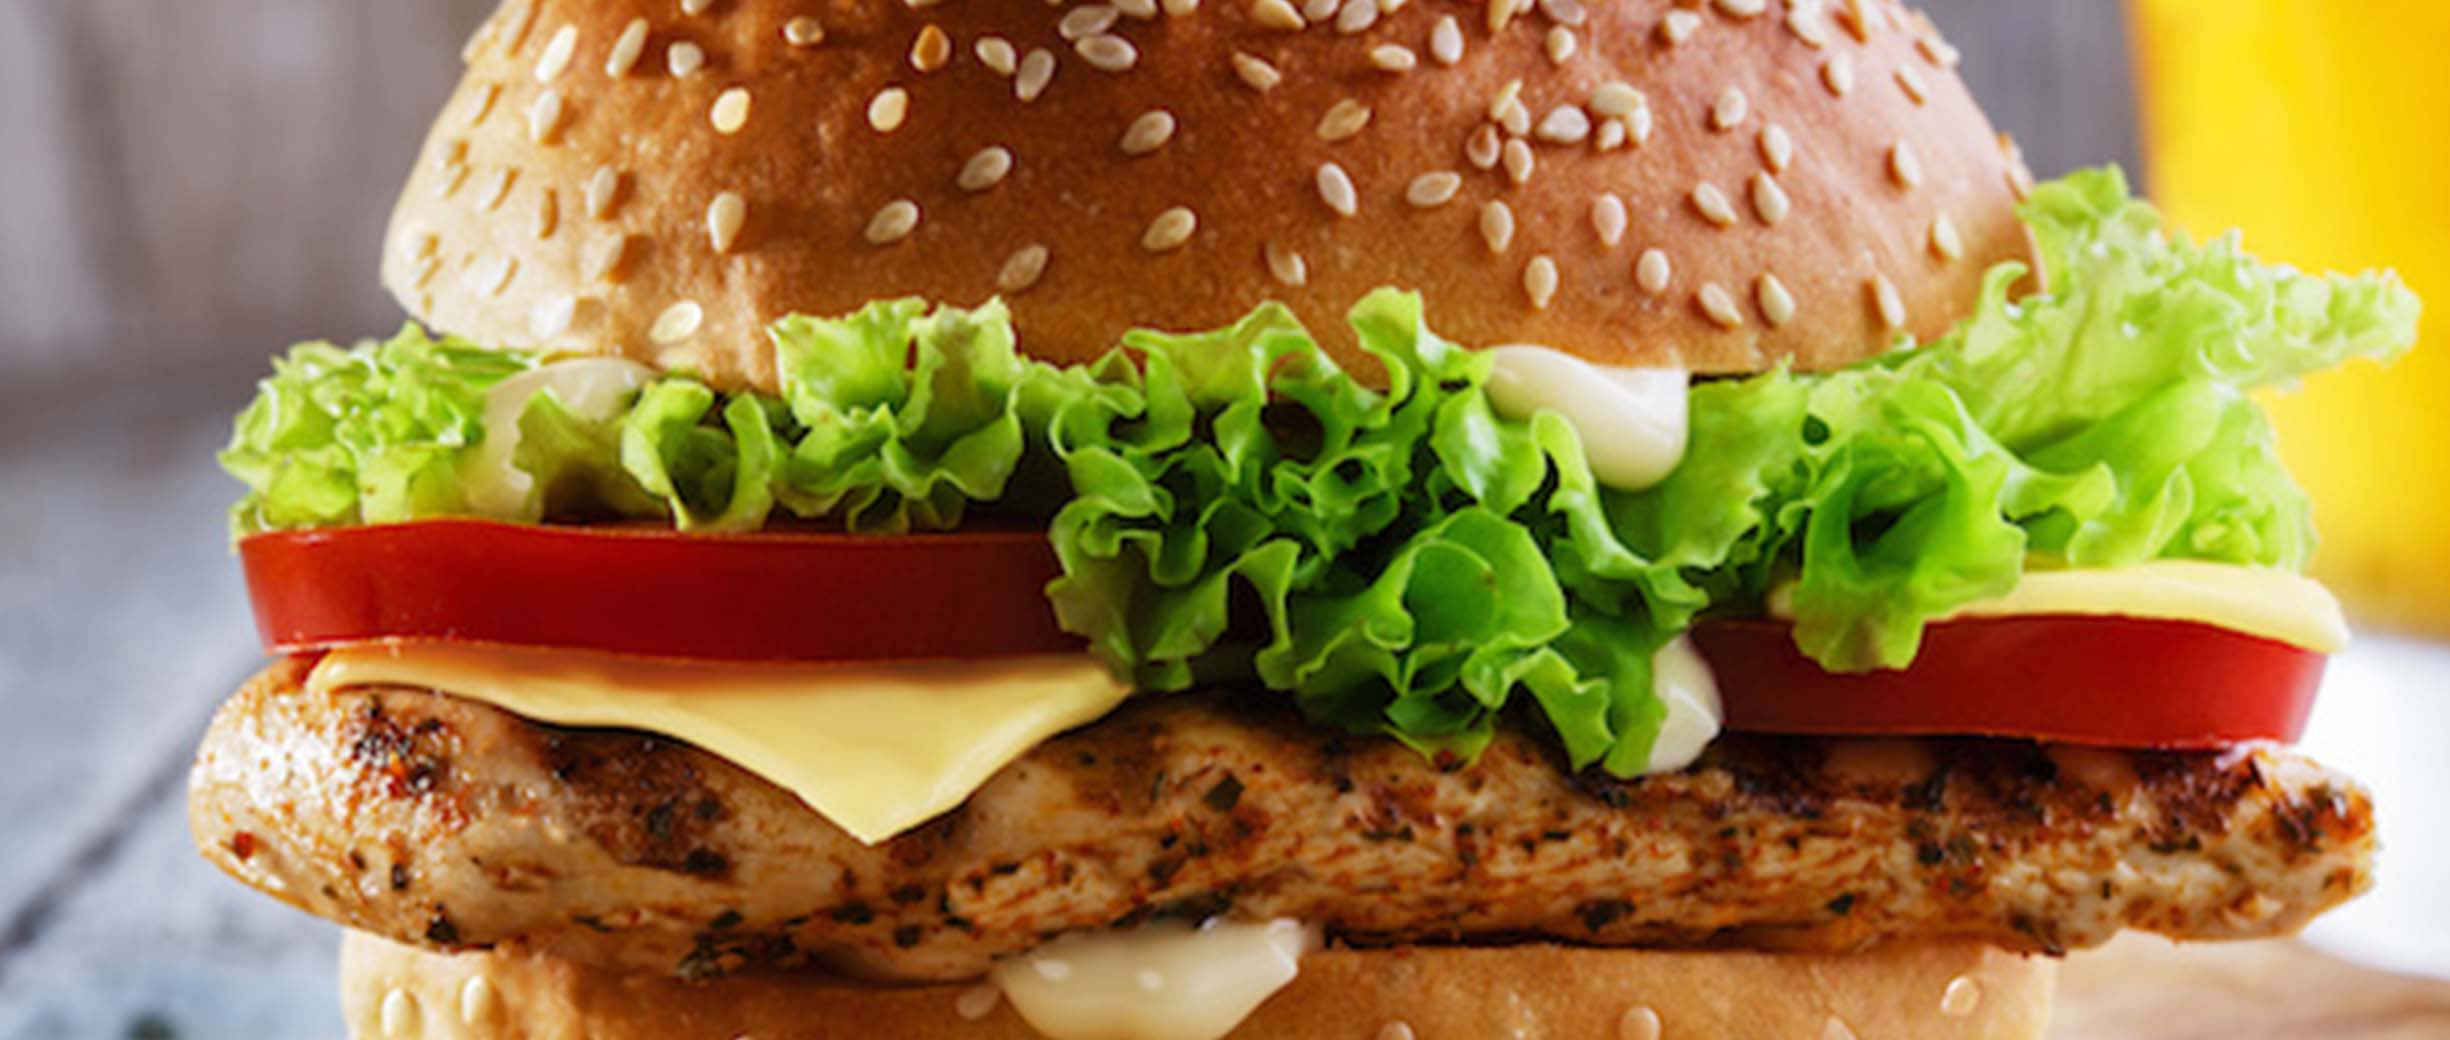 Six Simple Rules to Follow for Eating Nutritiously at Fast Food Restaurants